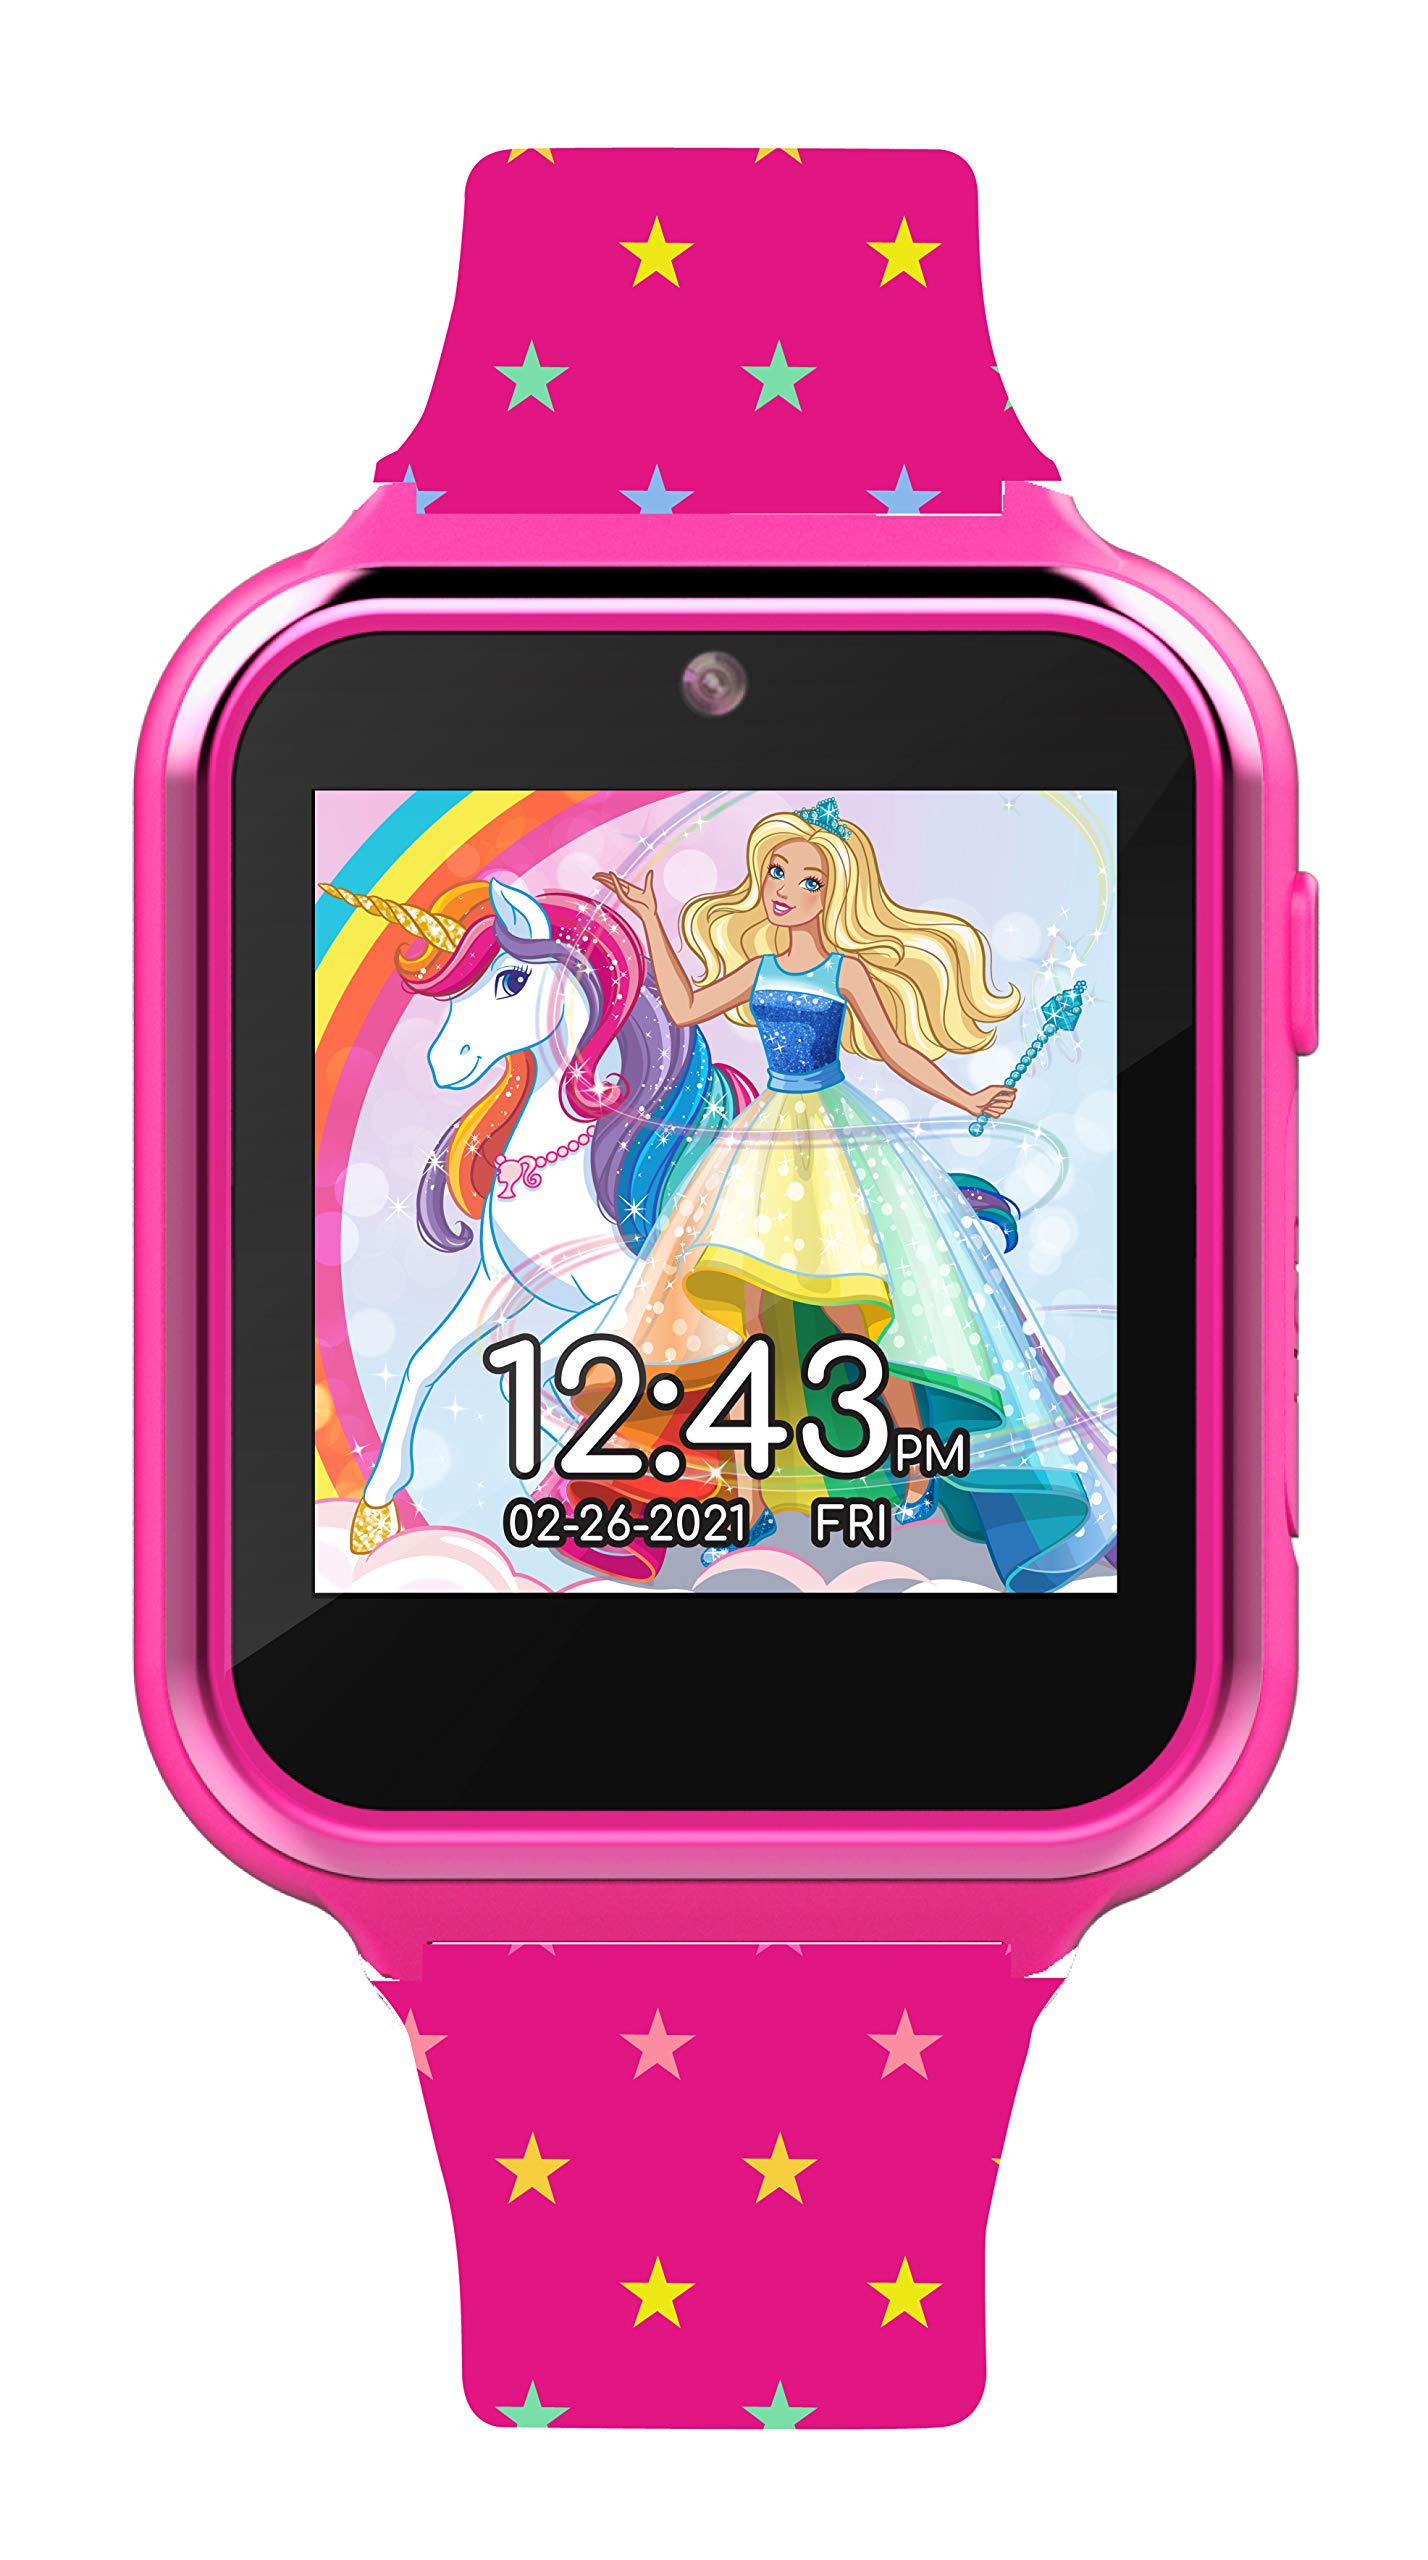 Accutime Kids Mattel Barbie Pink Educational Learning Touchscreen Smart Watch Toy for Girls, Boys, Toddlers - Selfie Cam, Learning Games, Alarm, Calculator, Pedometer & More (Model: BDT4069AZ), 40mm